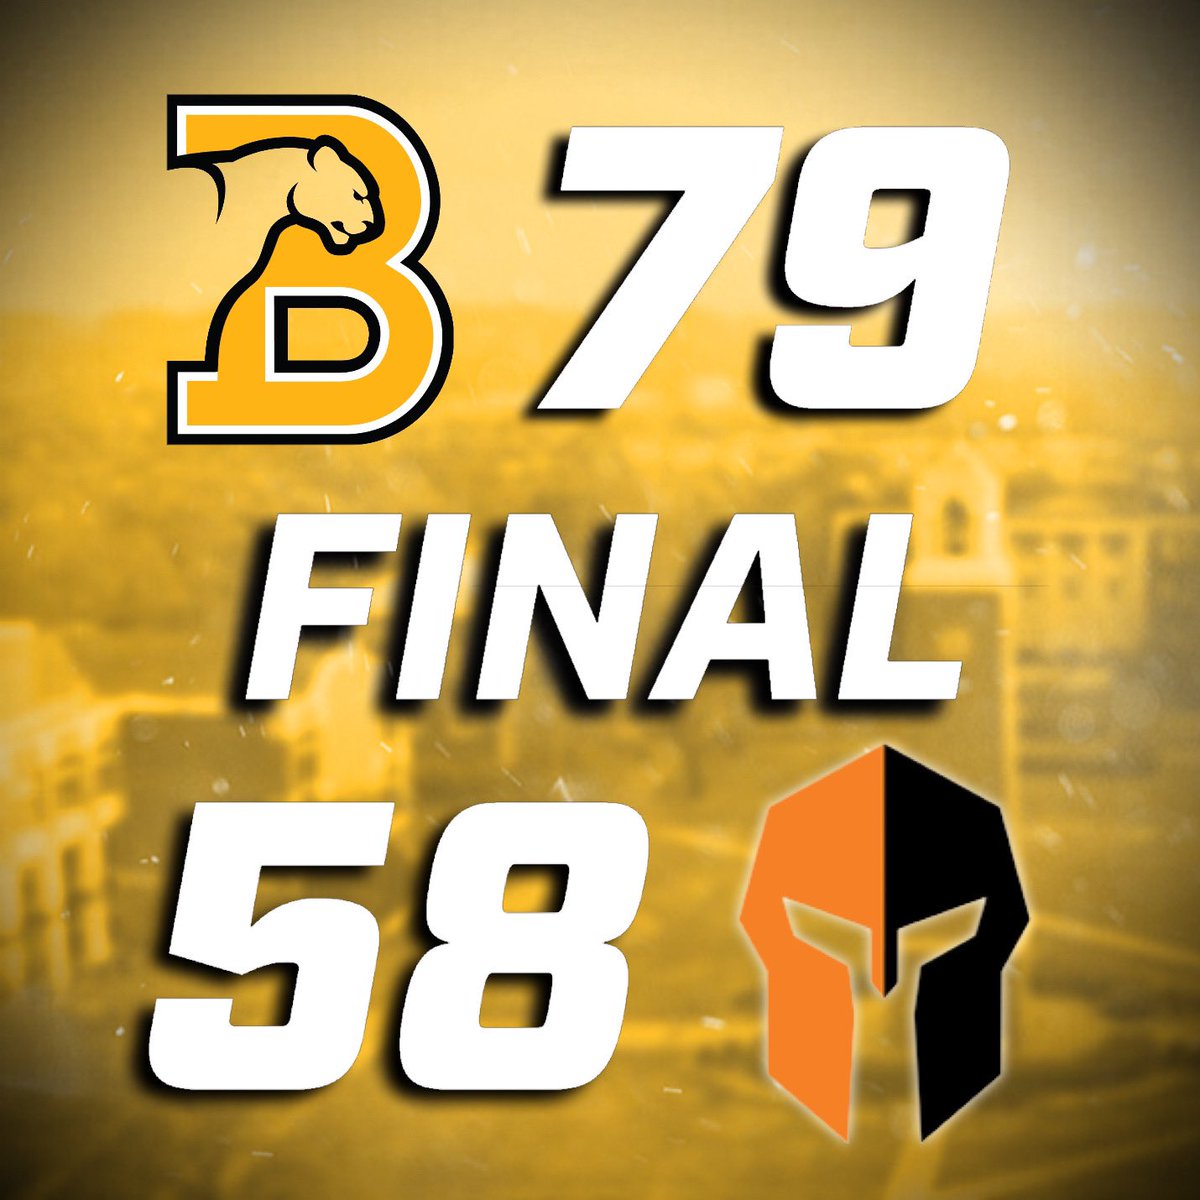 Final from Bill Battle! #yeahpanthers